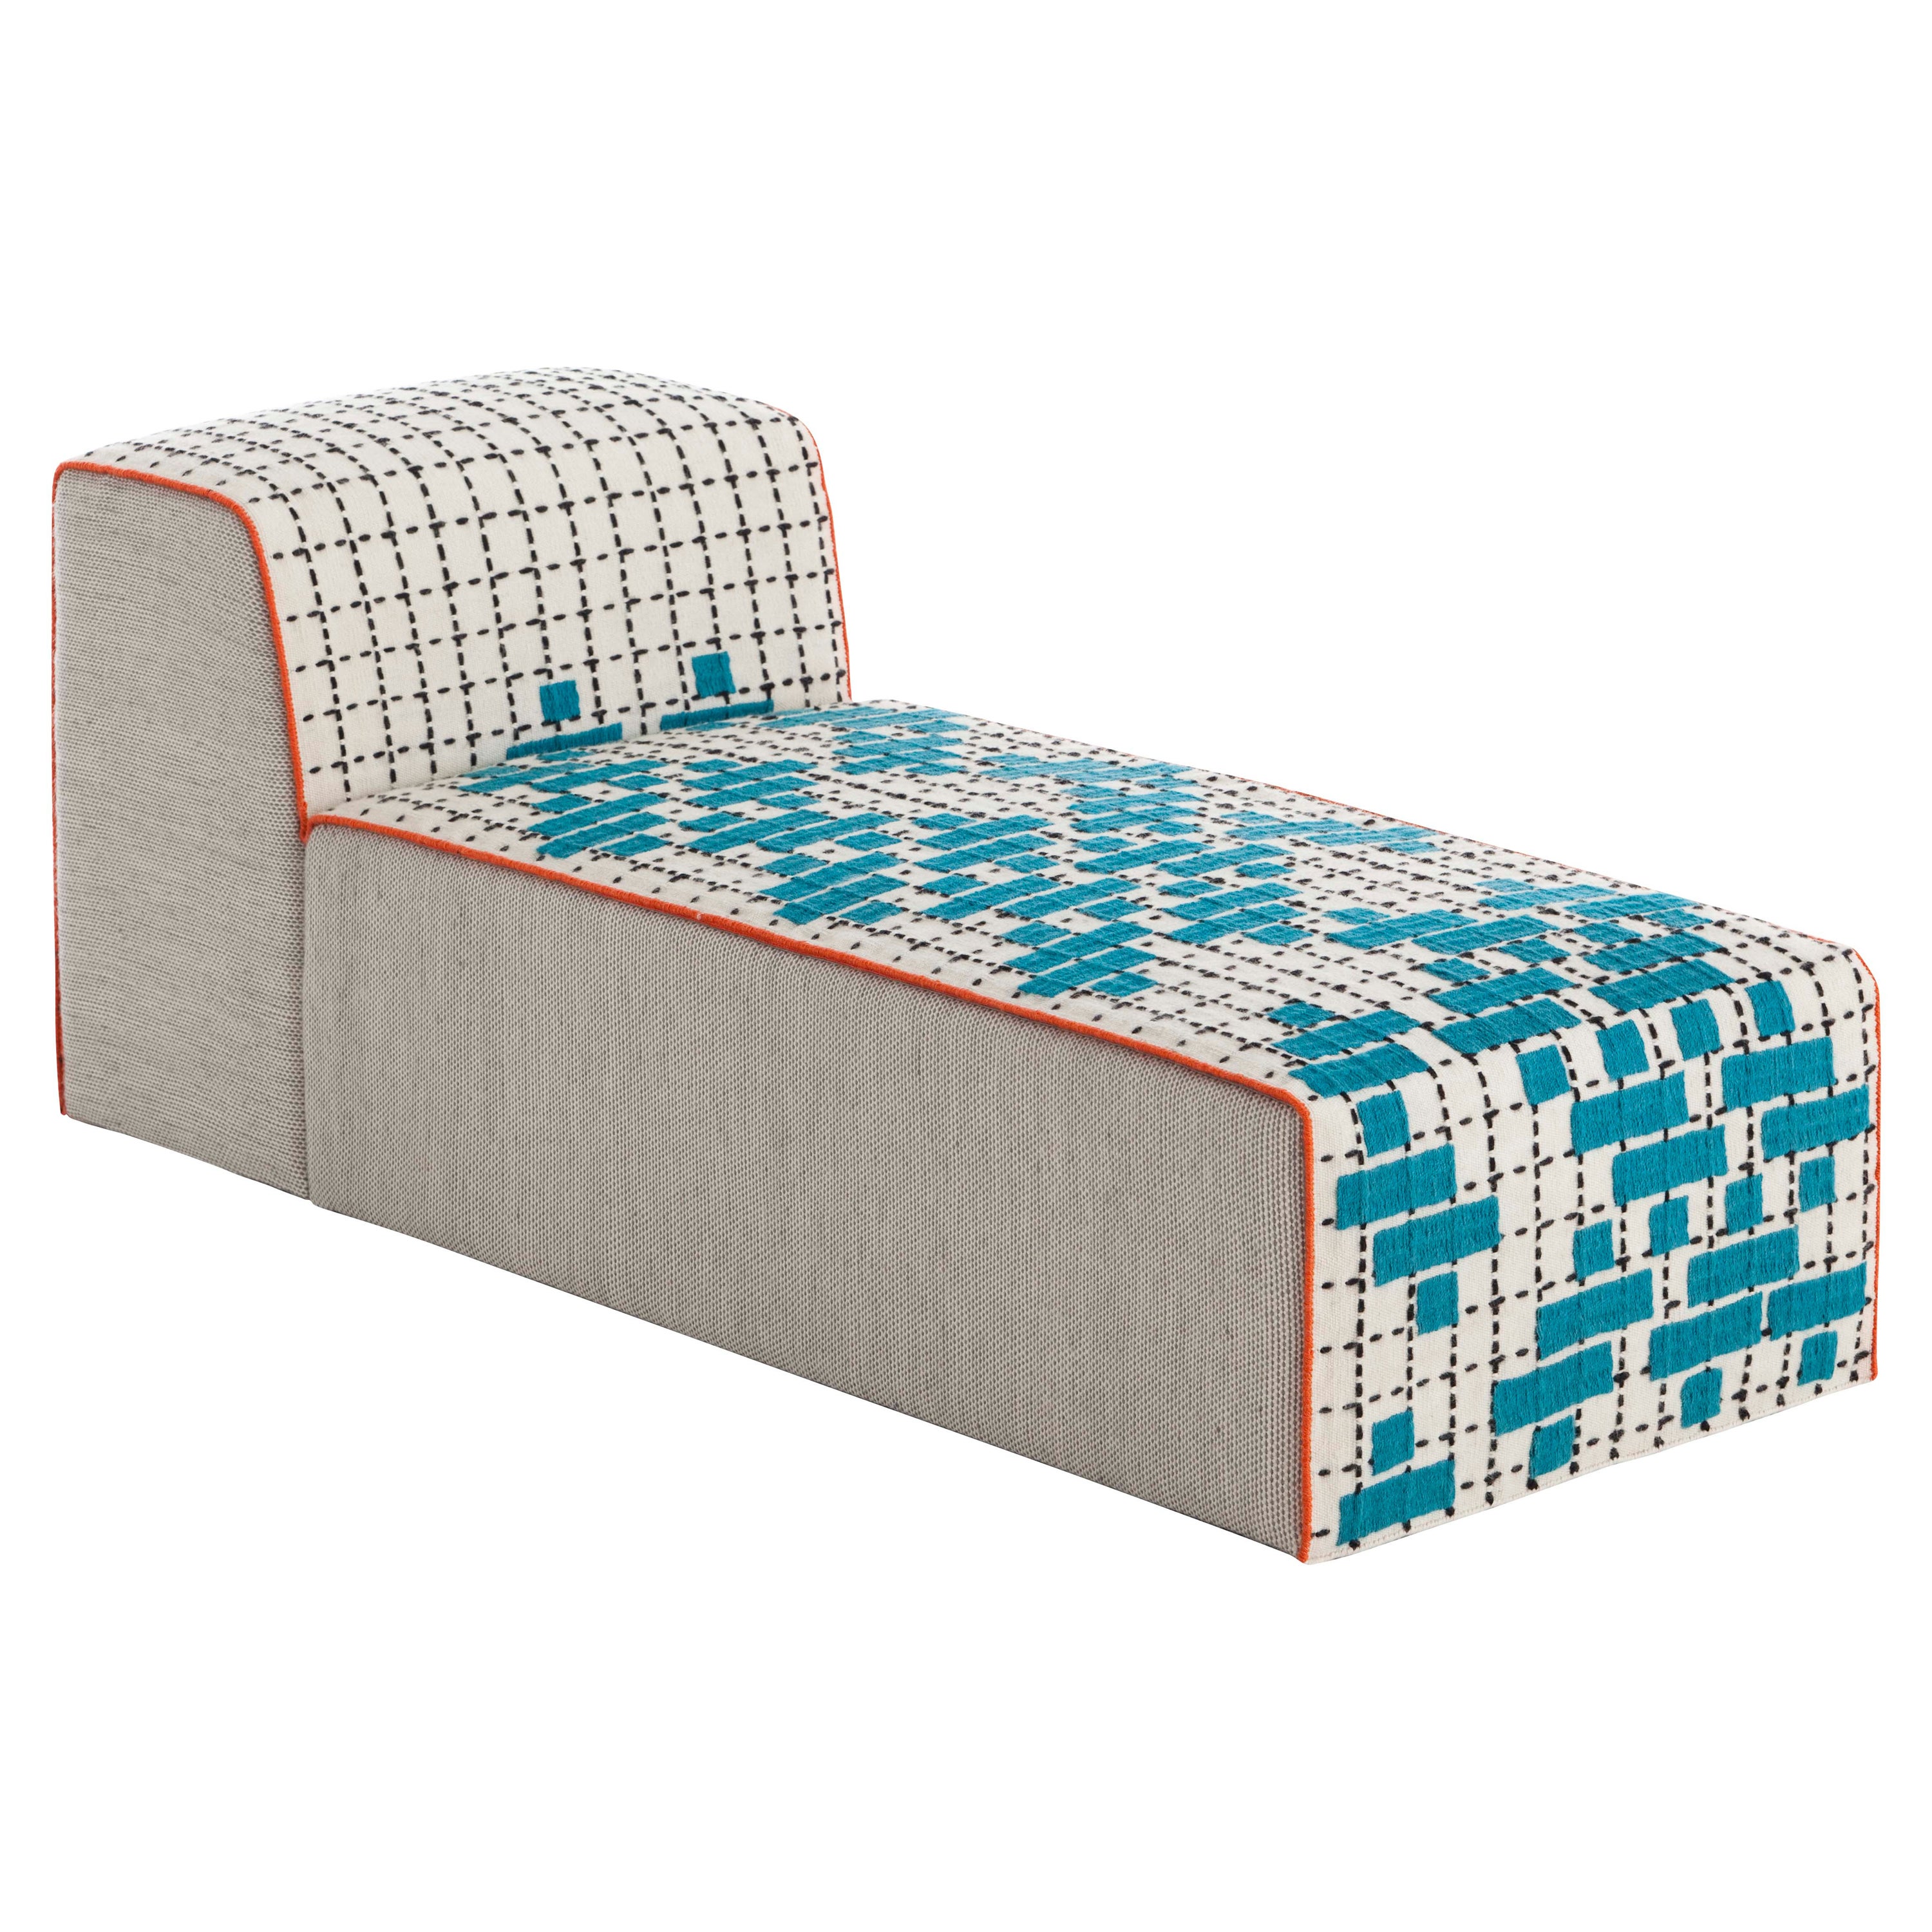 GAN Spaces Bandas Chaise Longue in C Turquoise with Wood Frame by Patricia For Sale